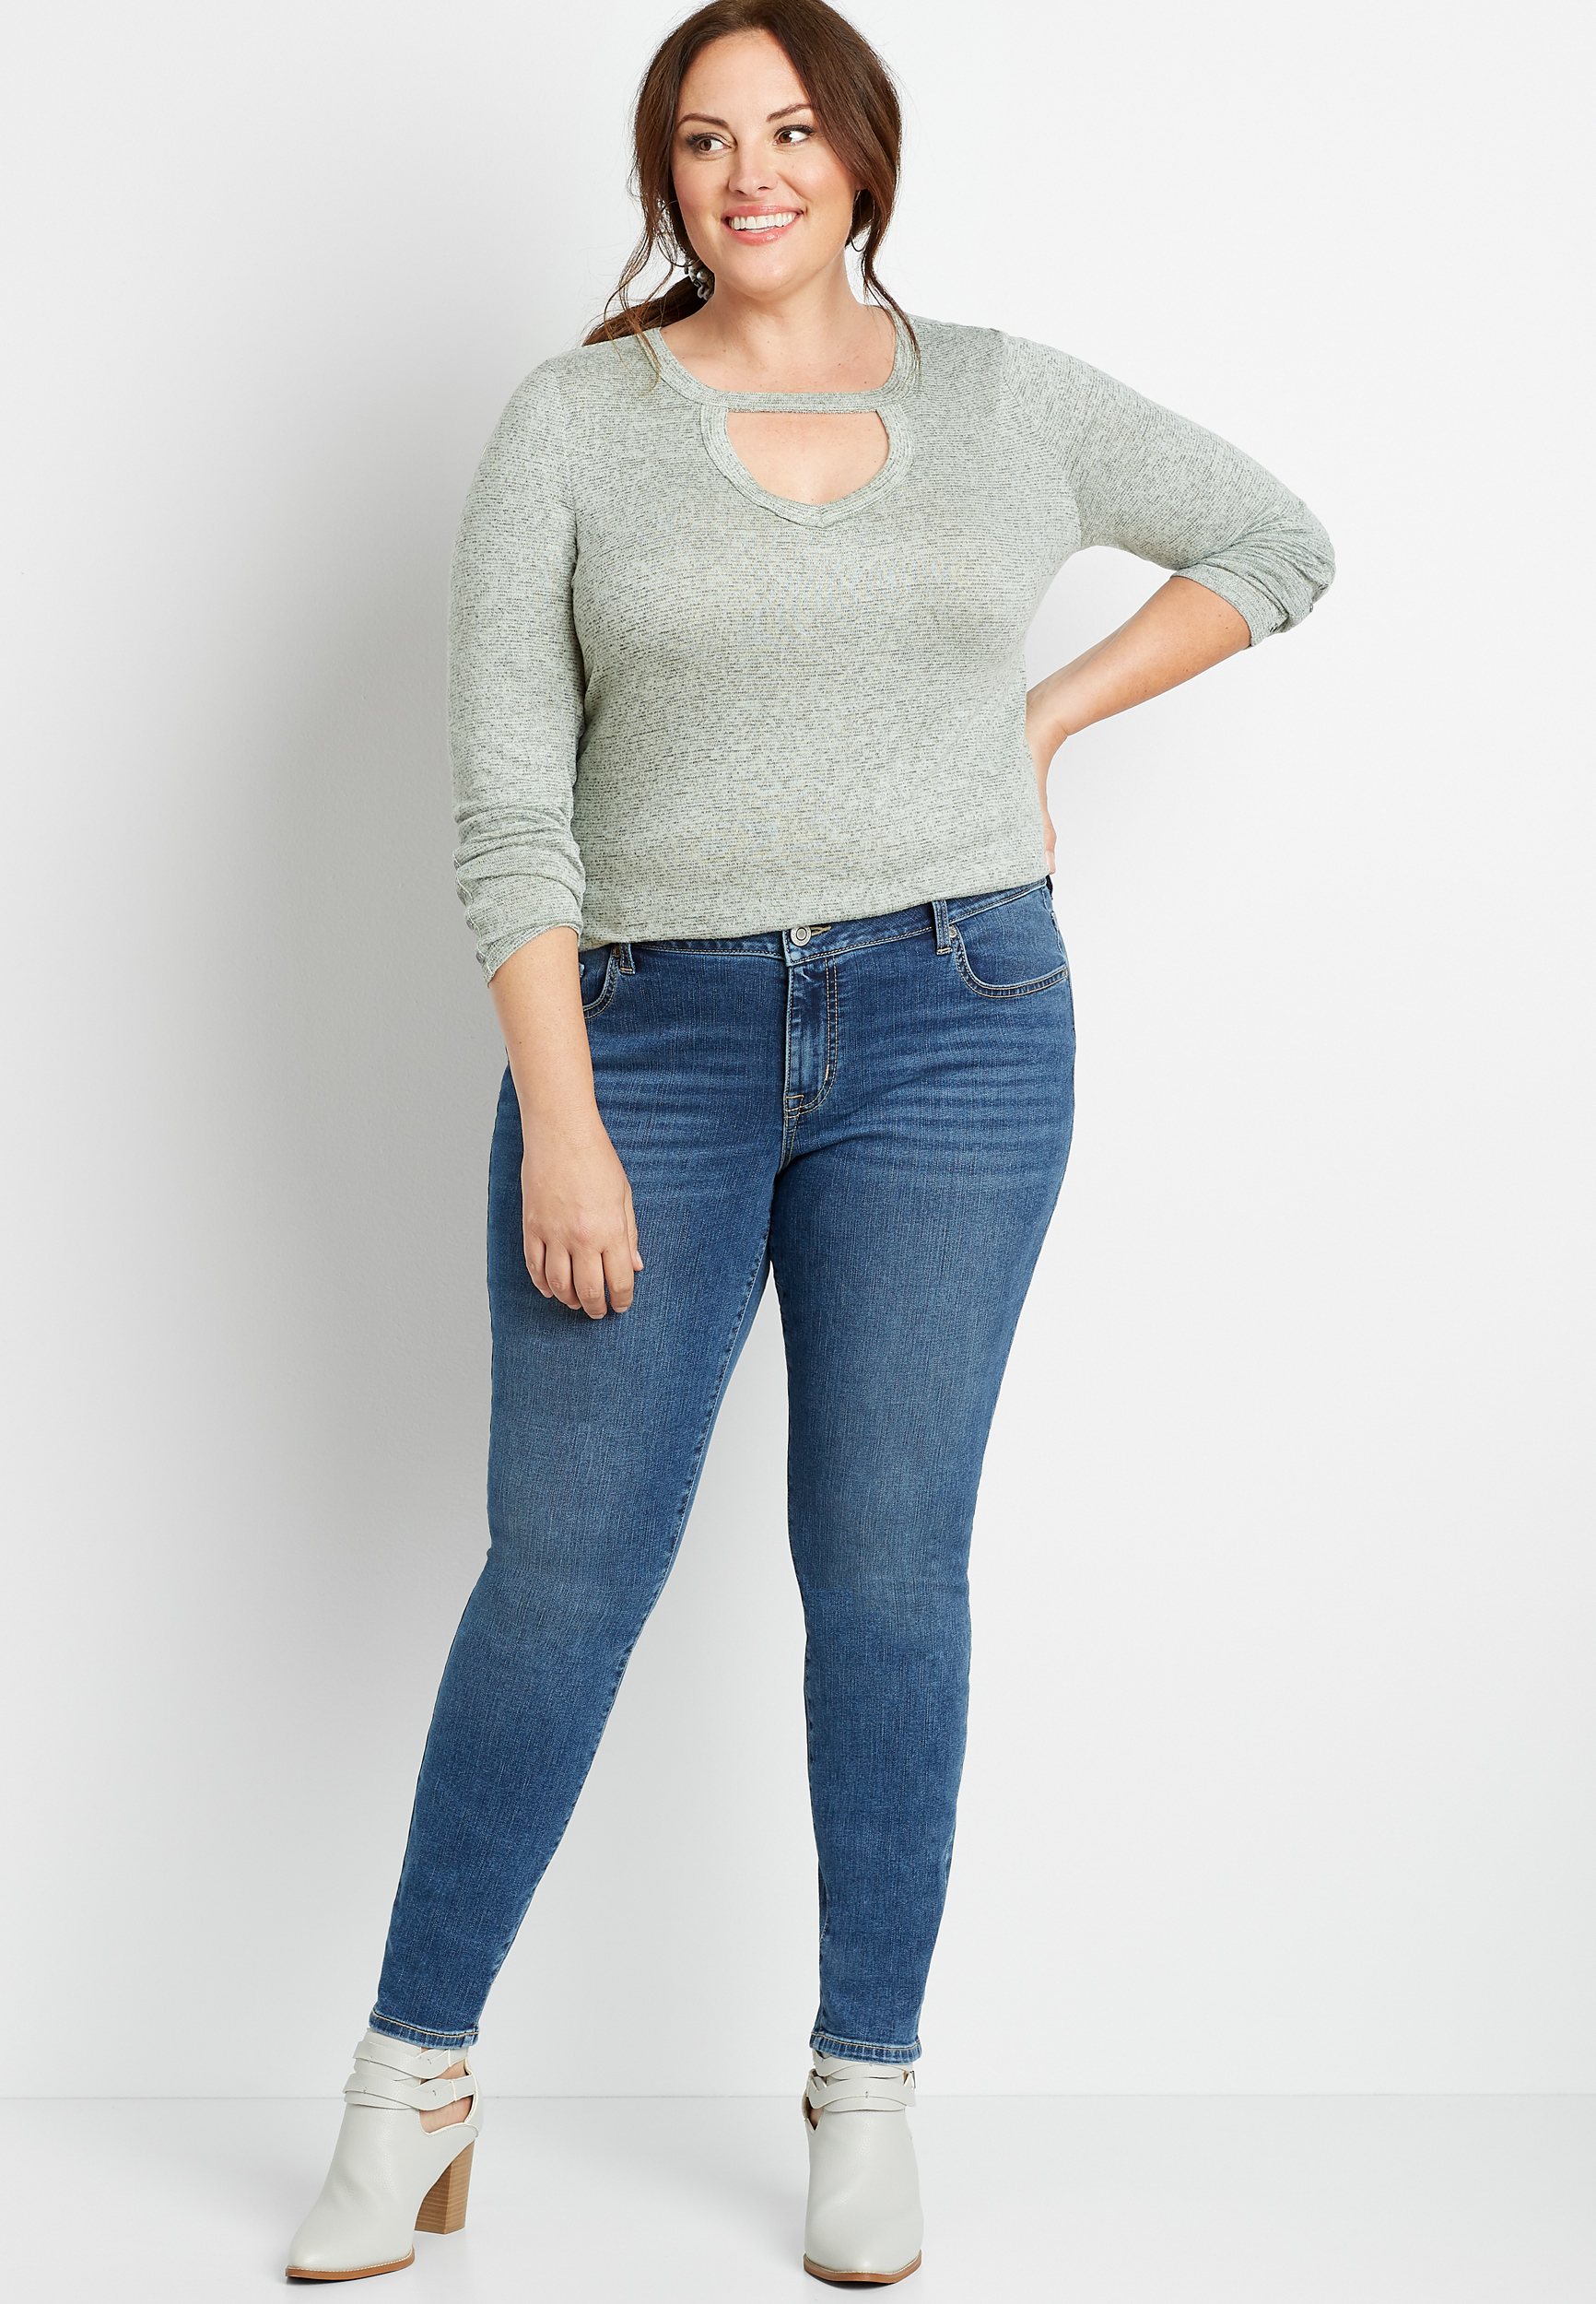 Extra Short Plus Size Jeans | maurices